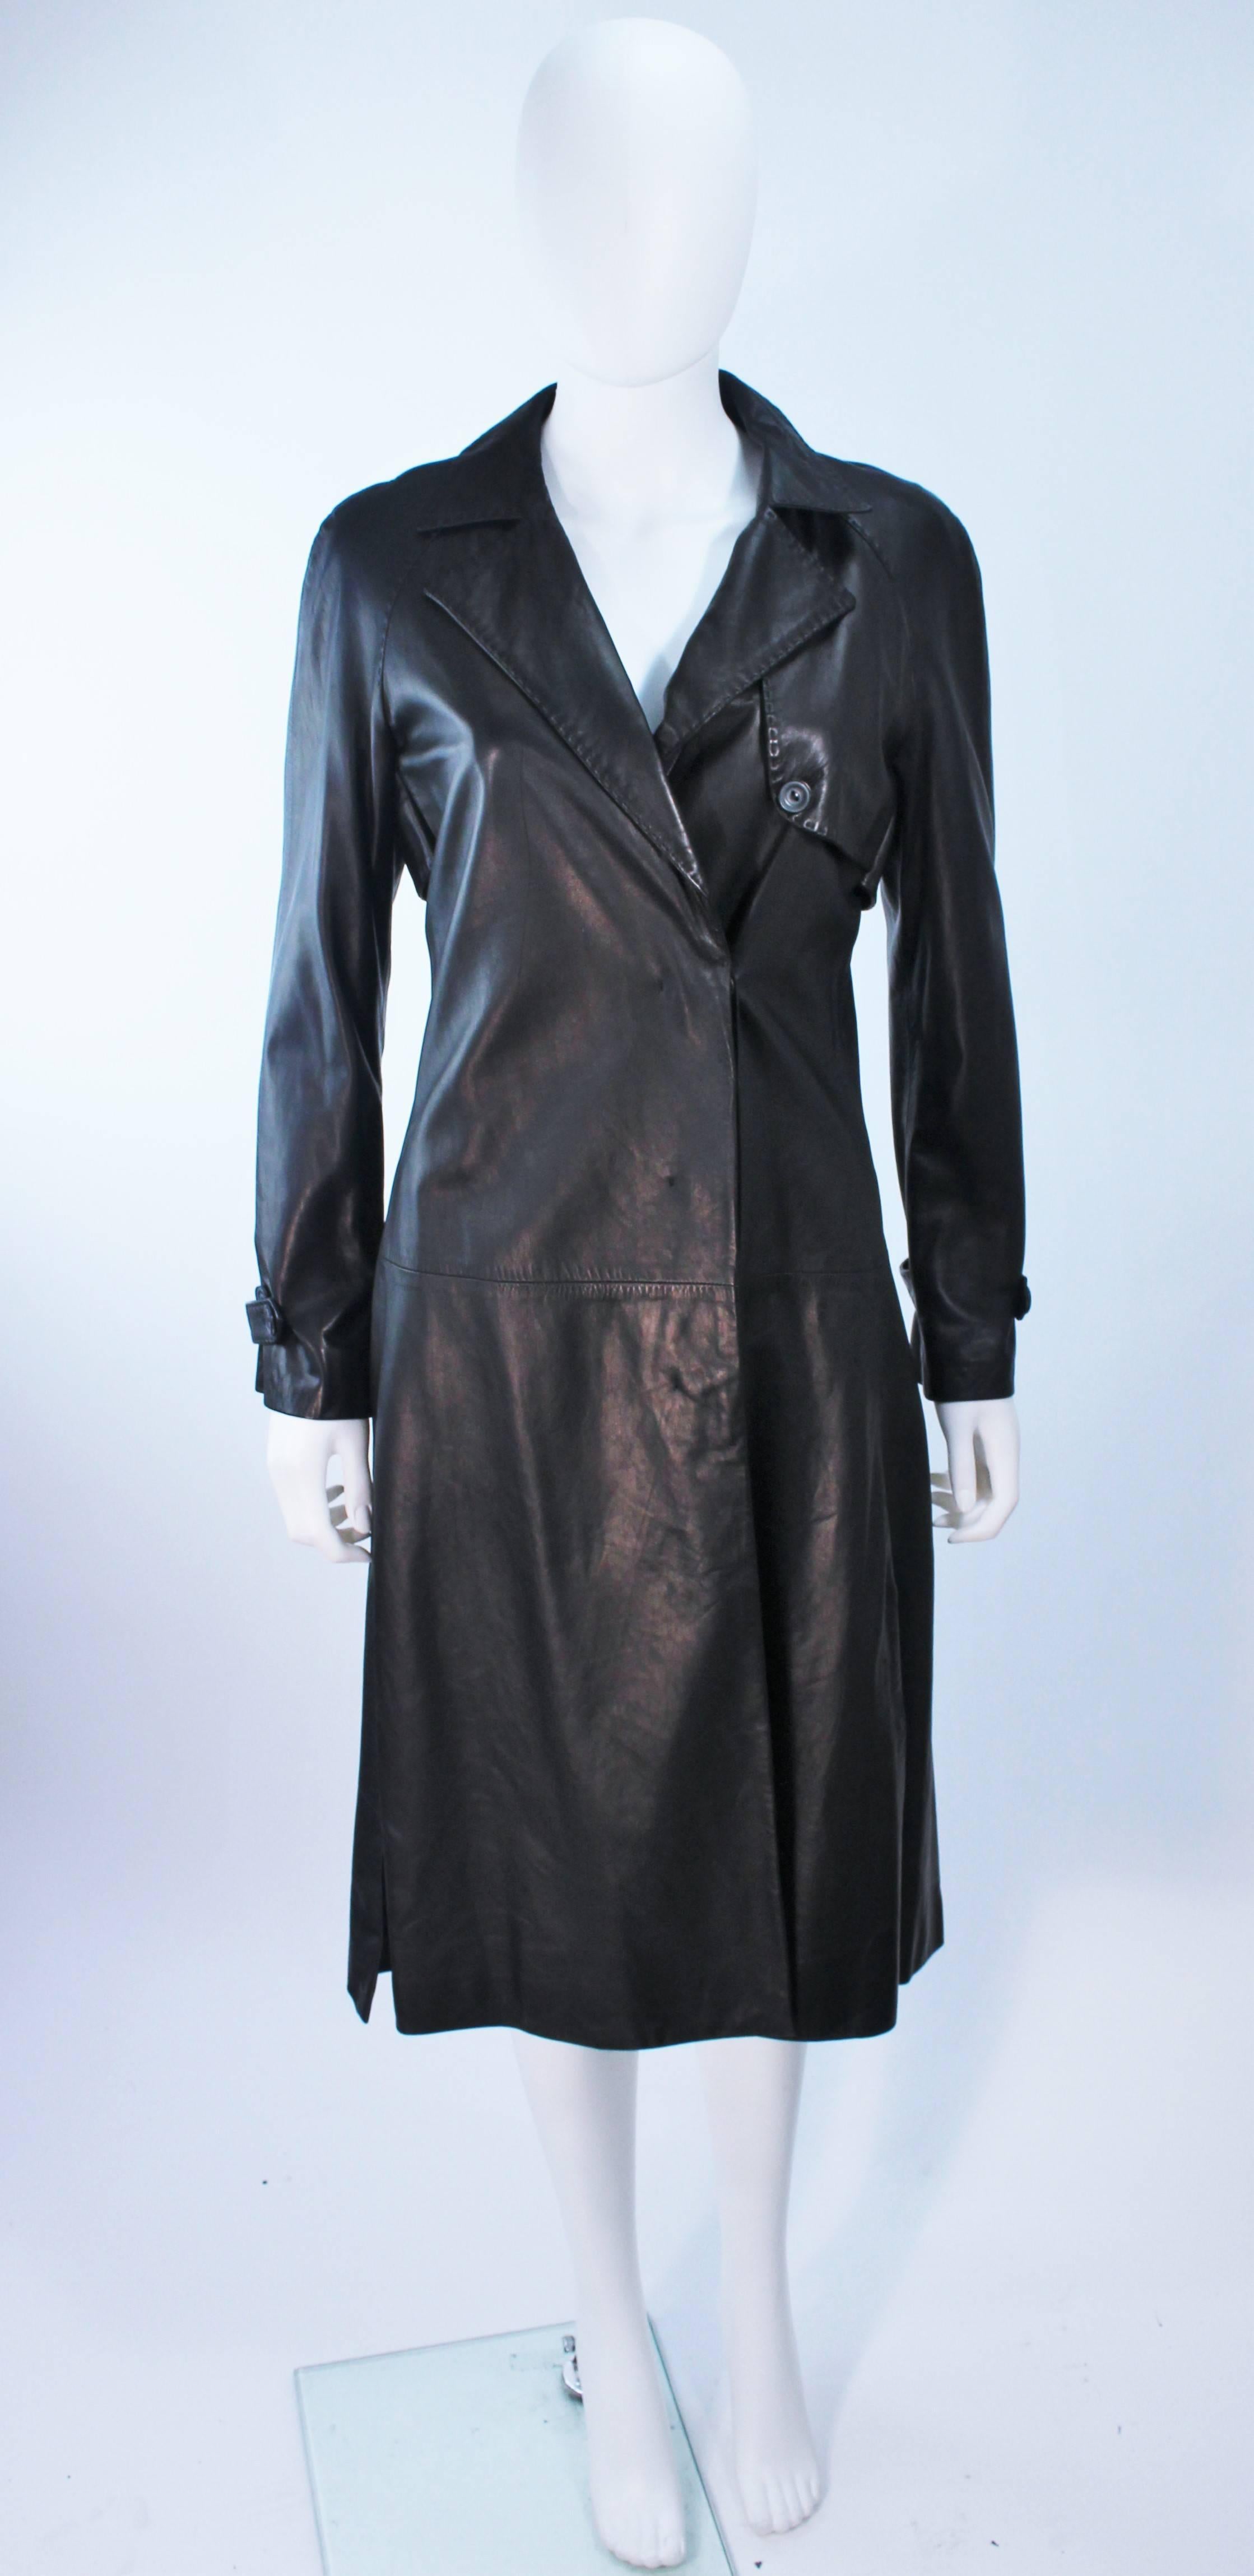 This Alexander McQueen coat is composed of an extremely soft fine grade black leather. Features a trench style with center front button closure and pockets. Top-stitch collar detail as well. In great condition. Made in Italy.

  **Please